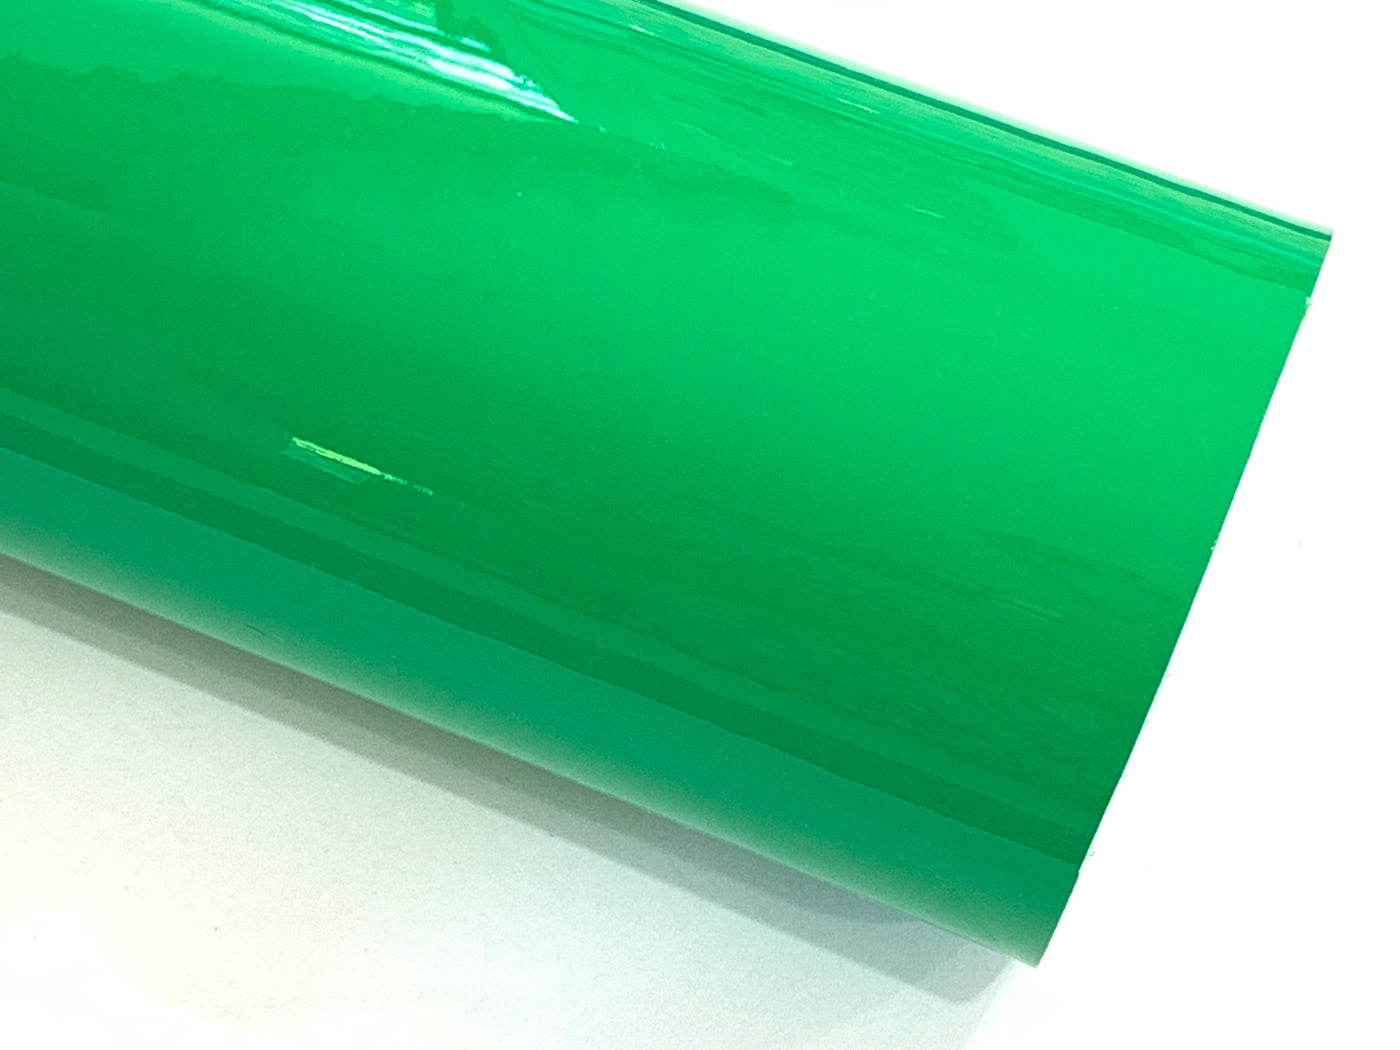 Bright Green Patent Leather A4 Sheet Glossy Smooth PU Leatherette - 0.75mm